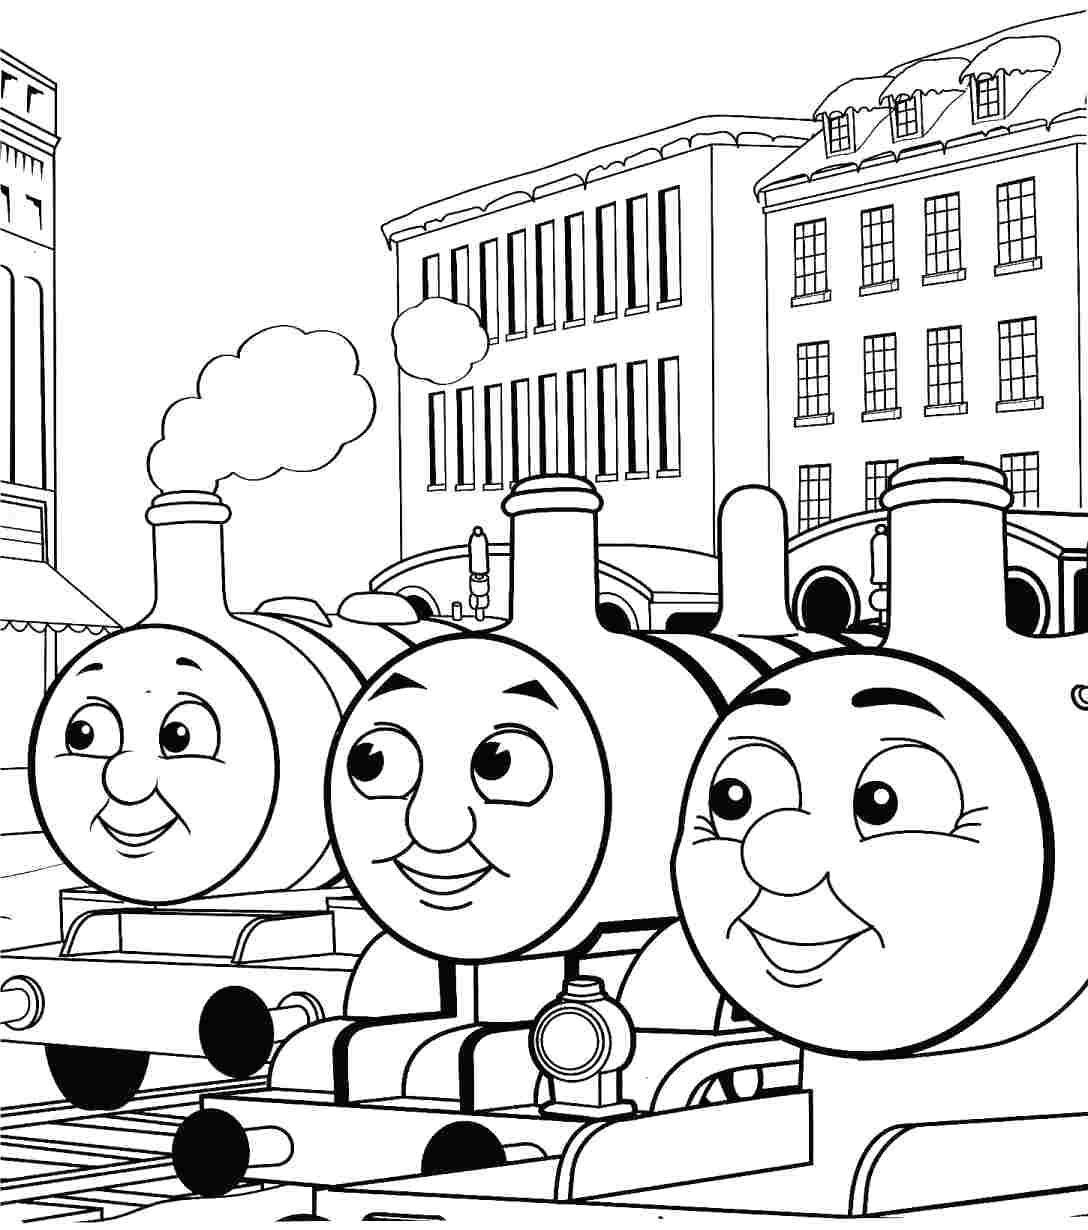 Thomas The Train Coloring Pages Online at Free